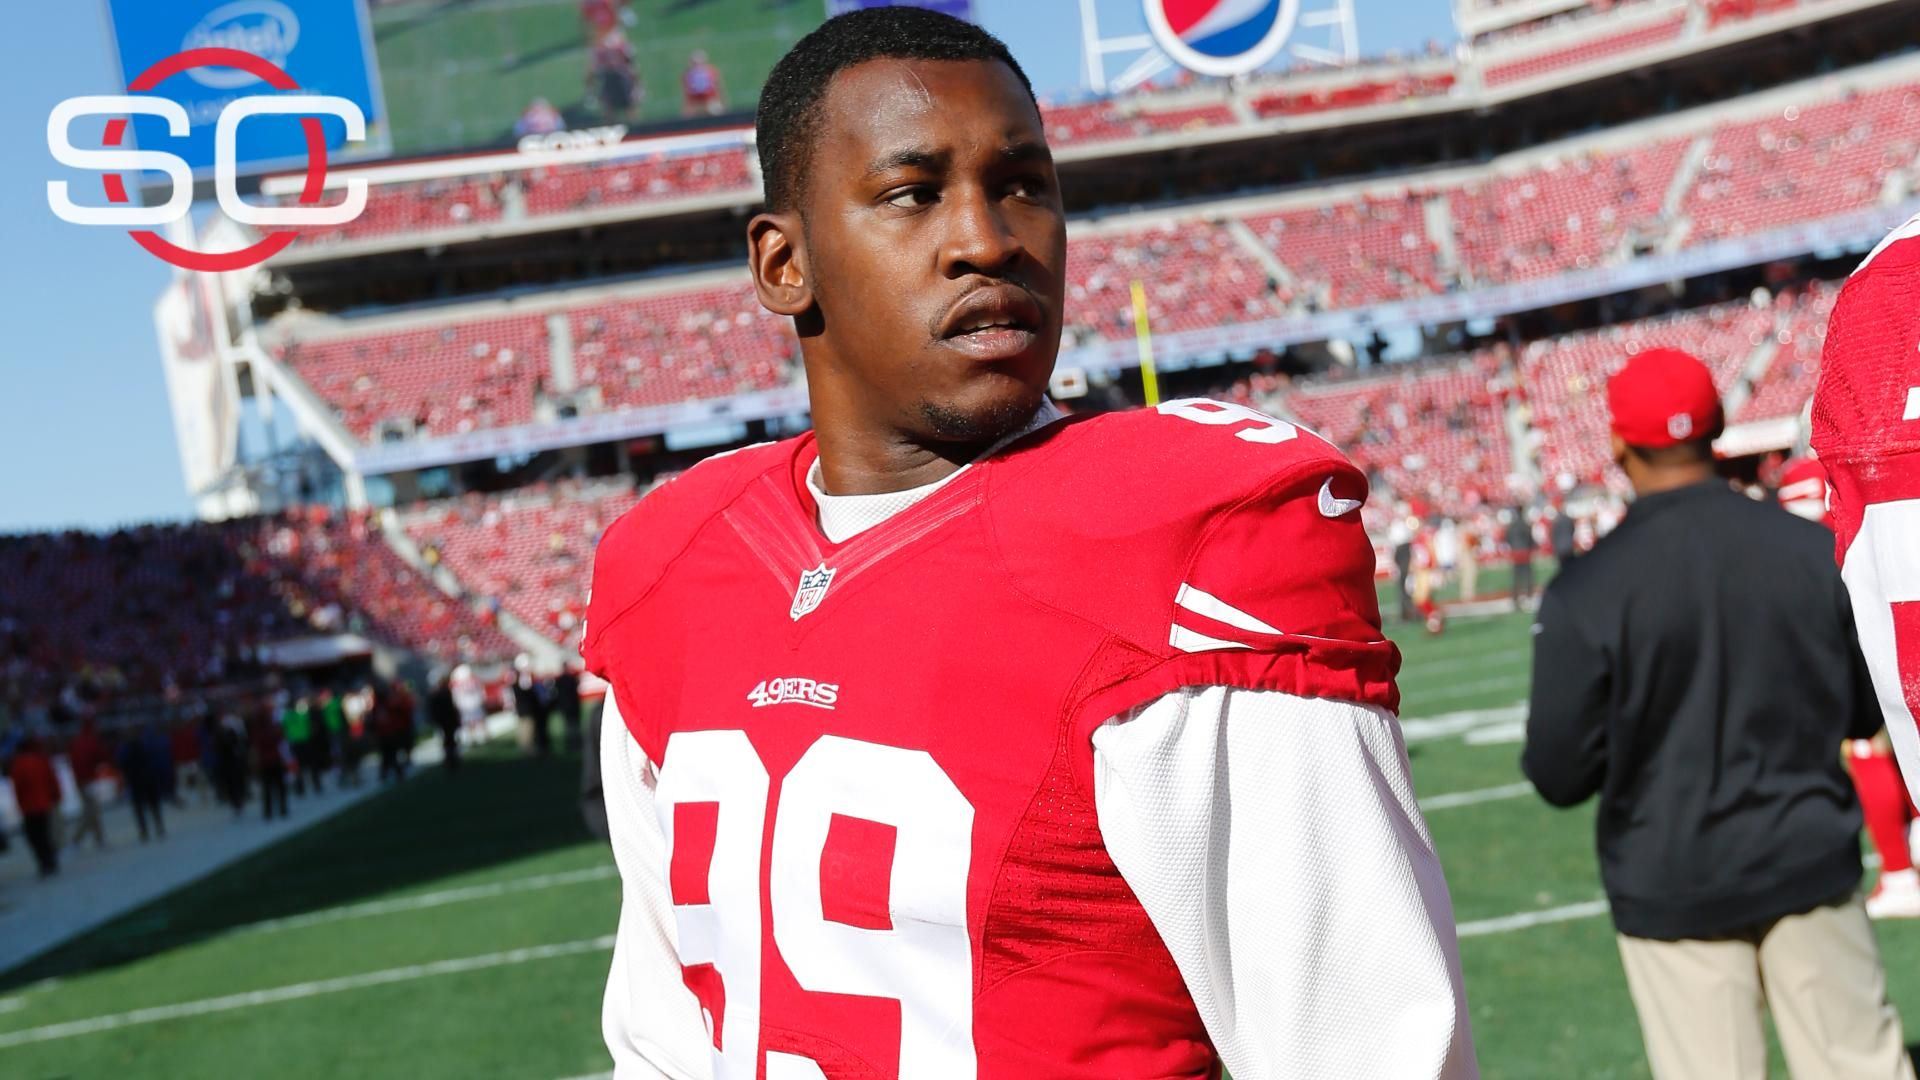 Aldon Smith signs one-year deal with Raiders